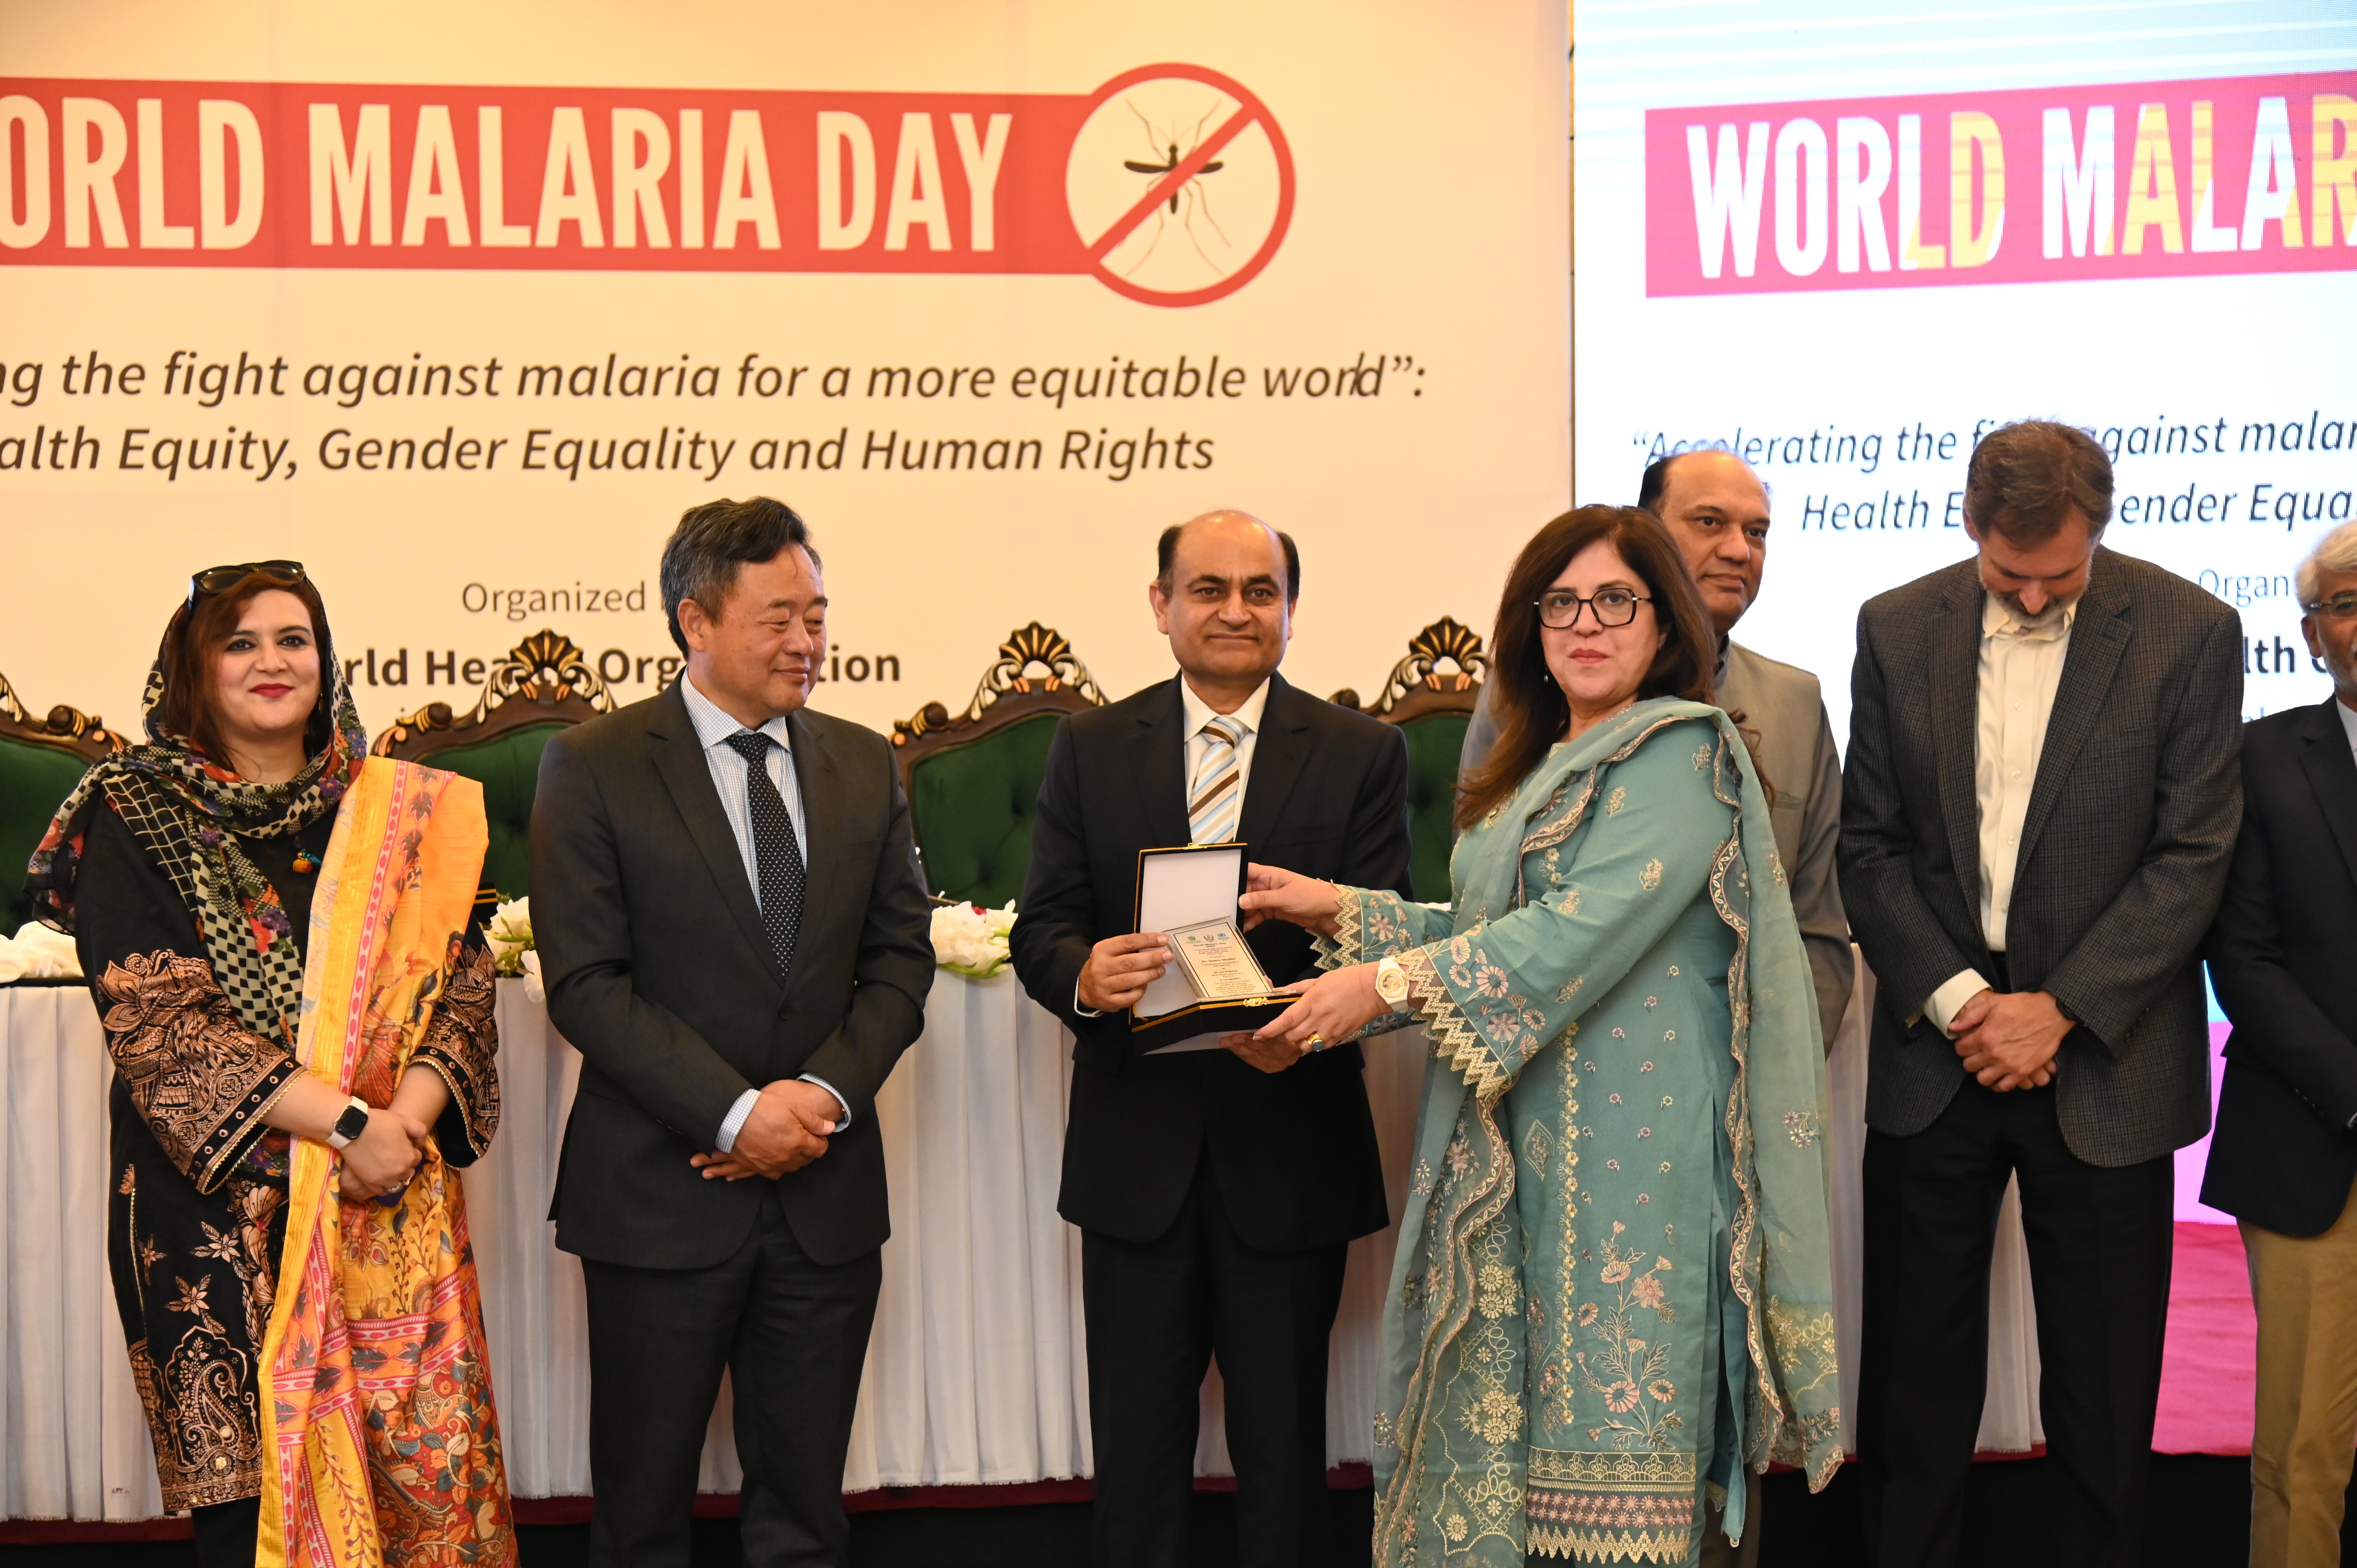 The shield distribution at the event of World Malaria Day 2038